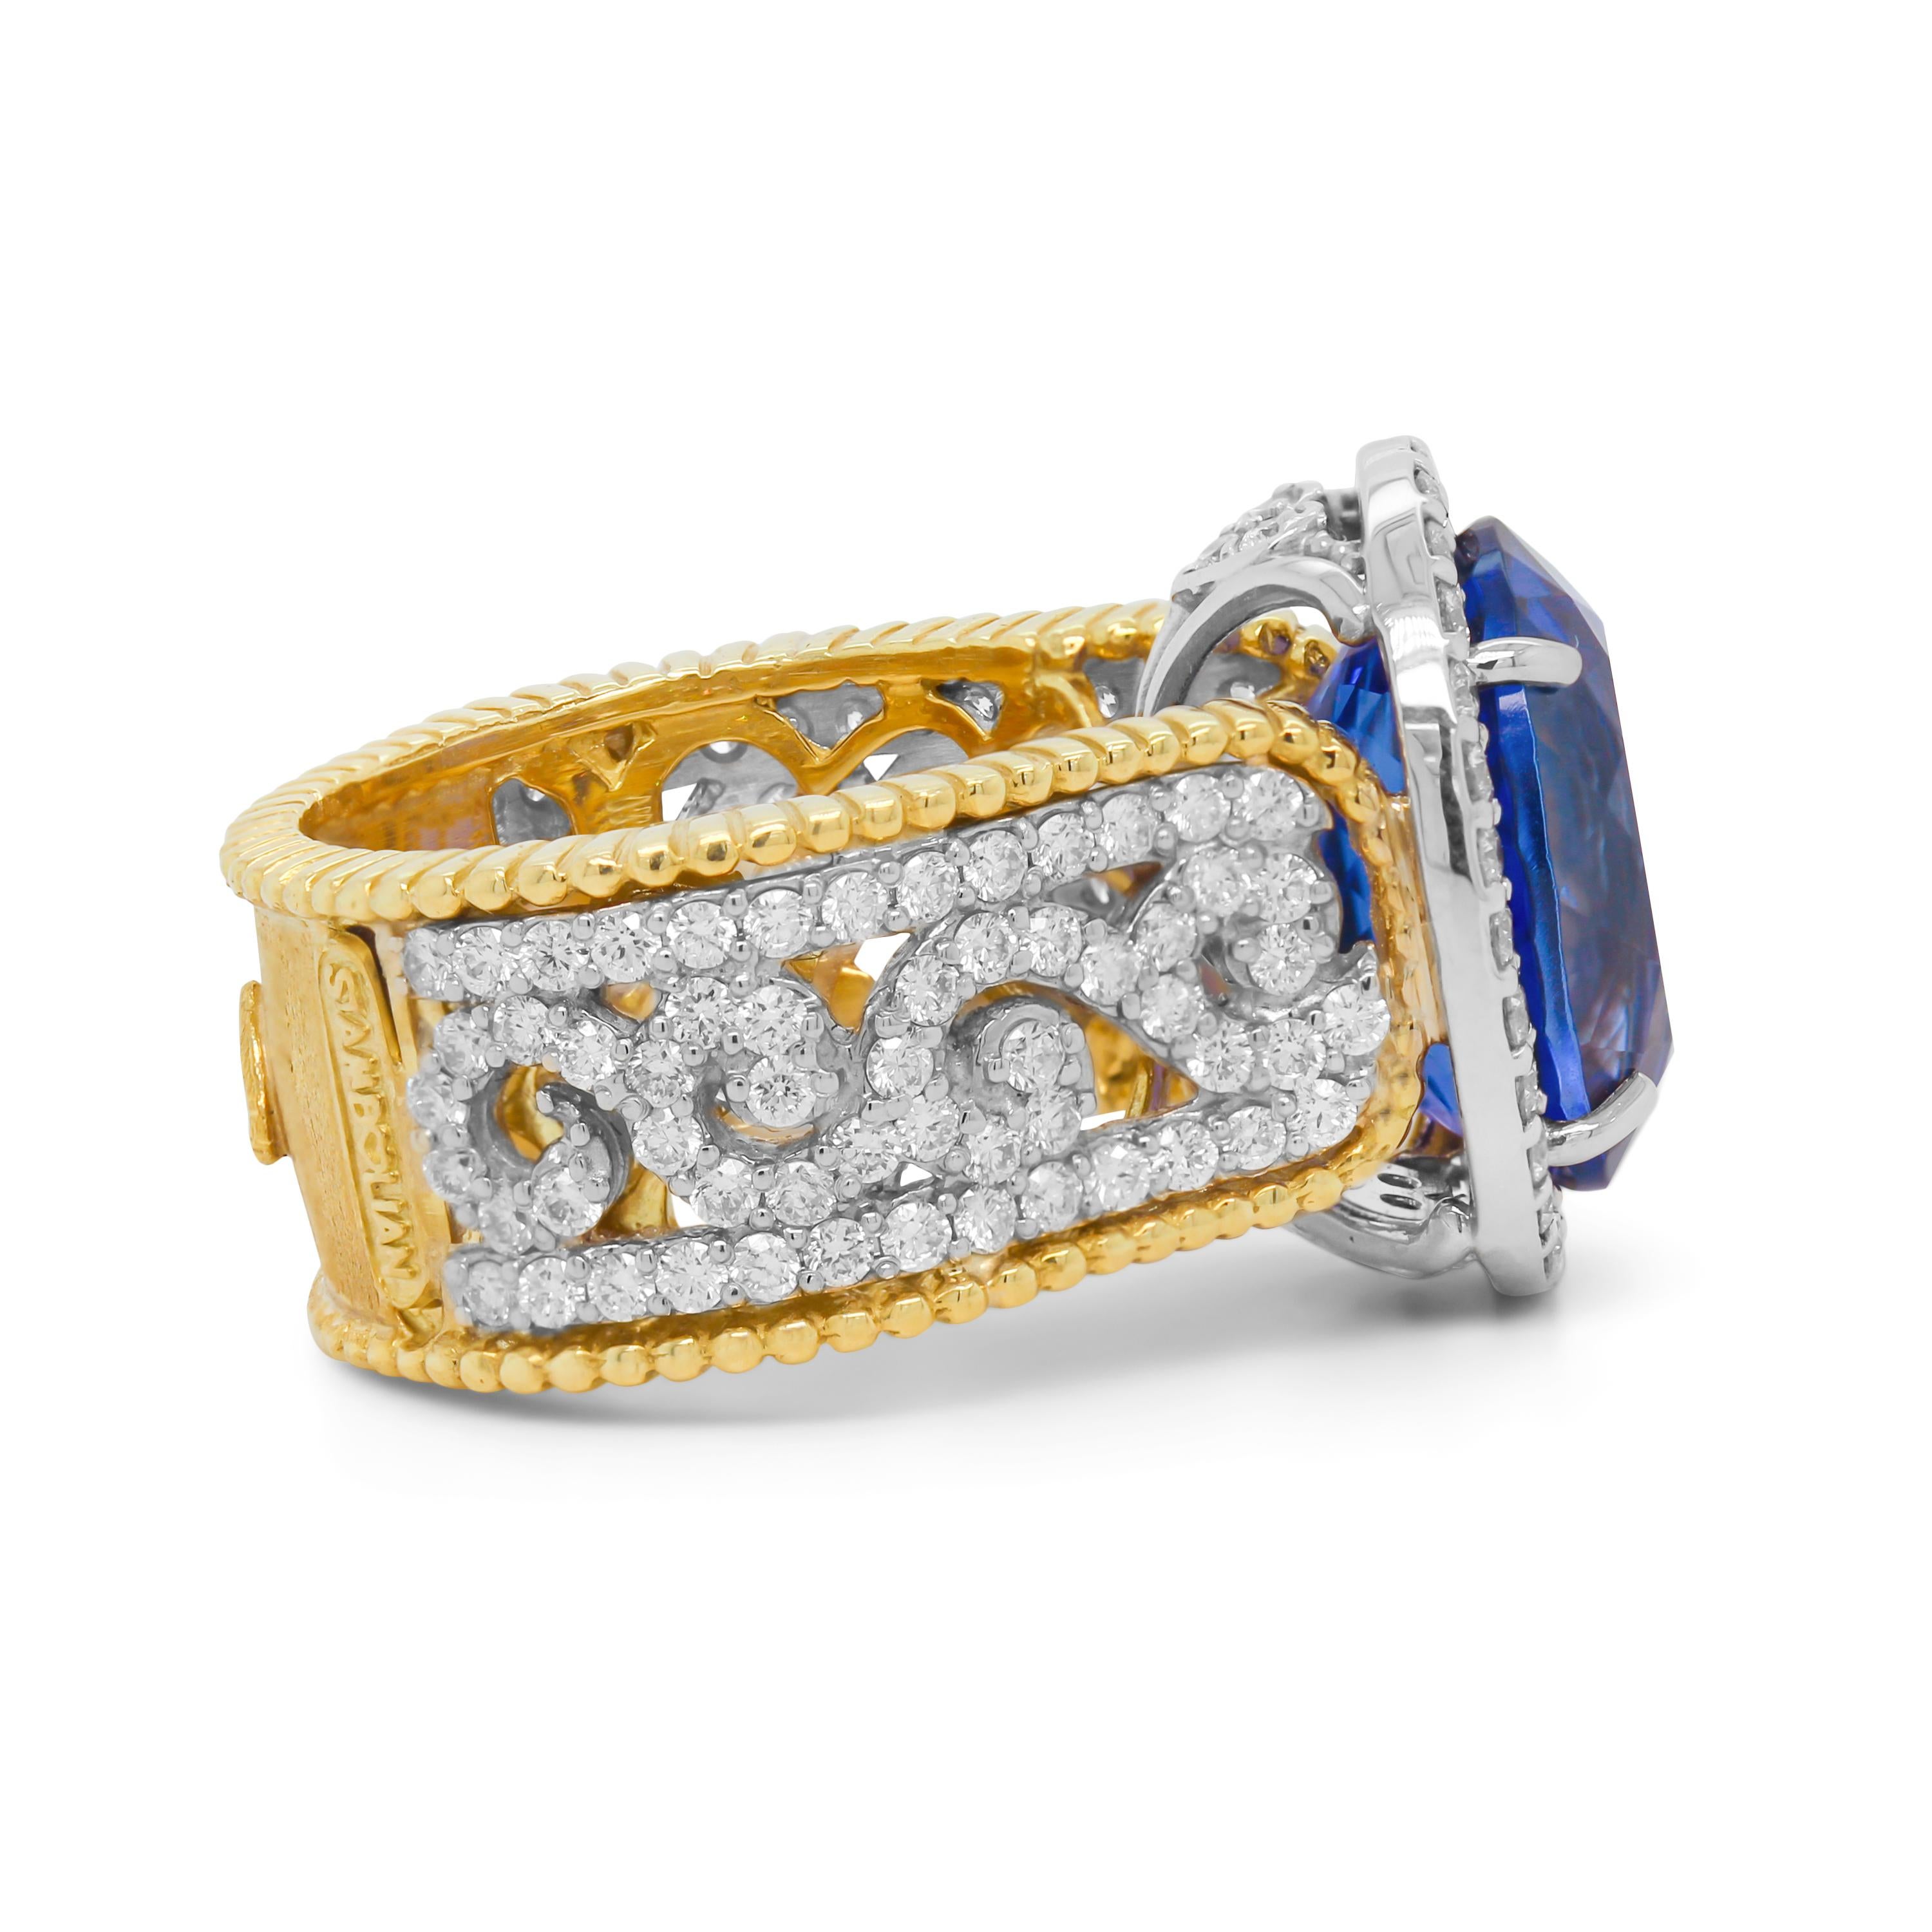 Stambolian 8.86 Carat Tanzanite 18K Two Tone Yellow White Gold Diamond Ring

This one-of-a-kind ring by Stambolian features a gorgeous, AAA quality Tanzanite center with vibrant color

8.86 carat Tanzanite center, oval-cut

1.72 carat G color, VS